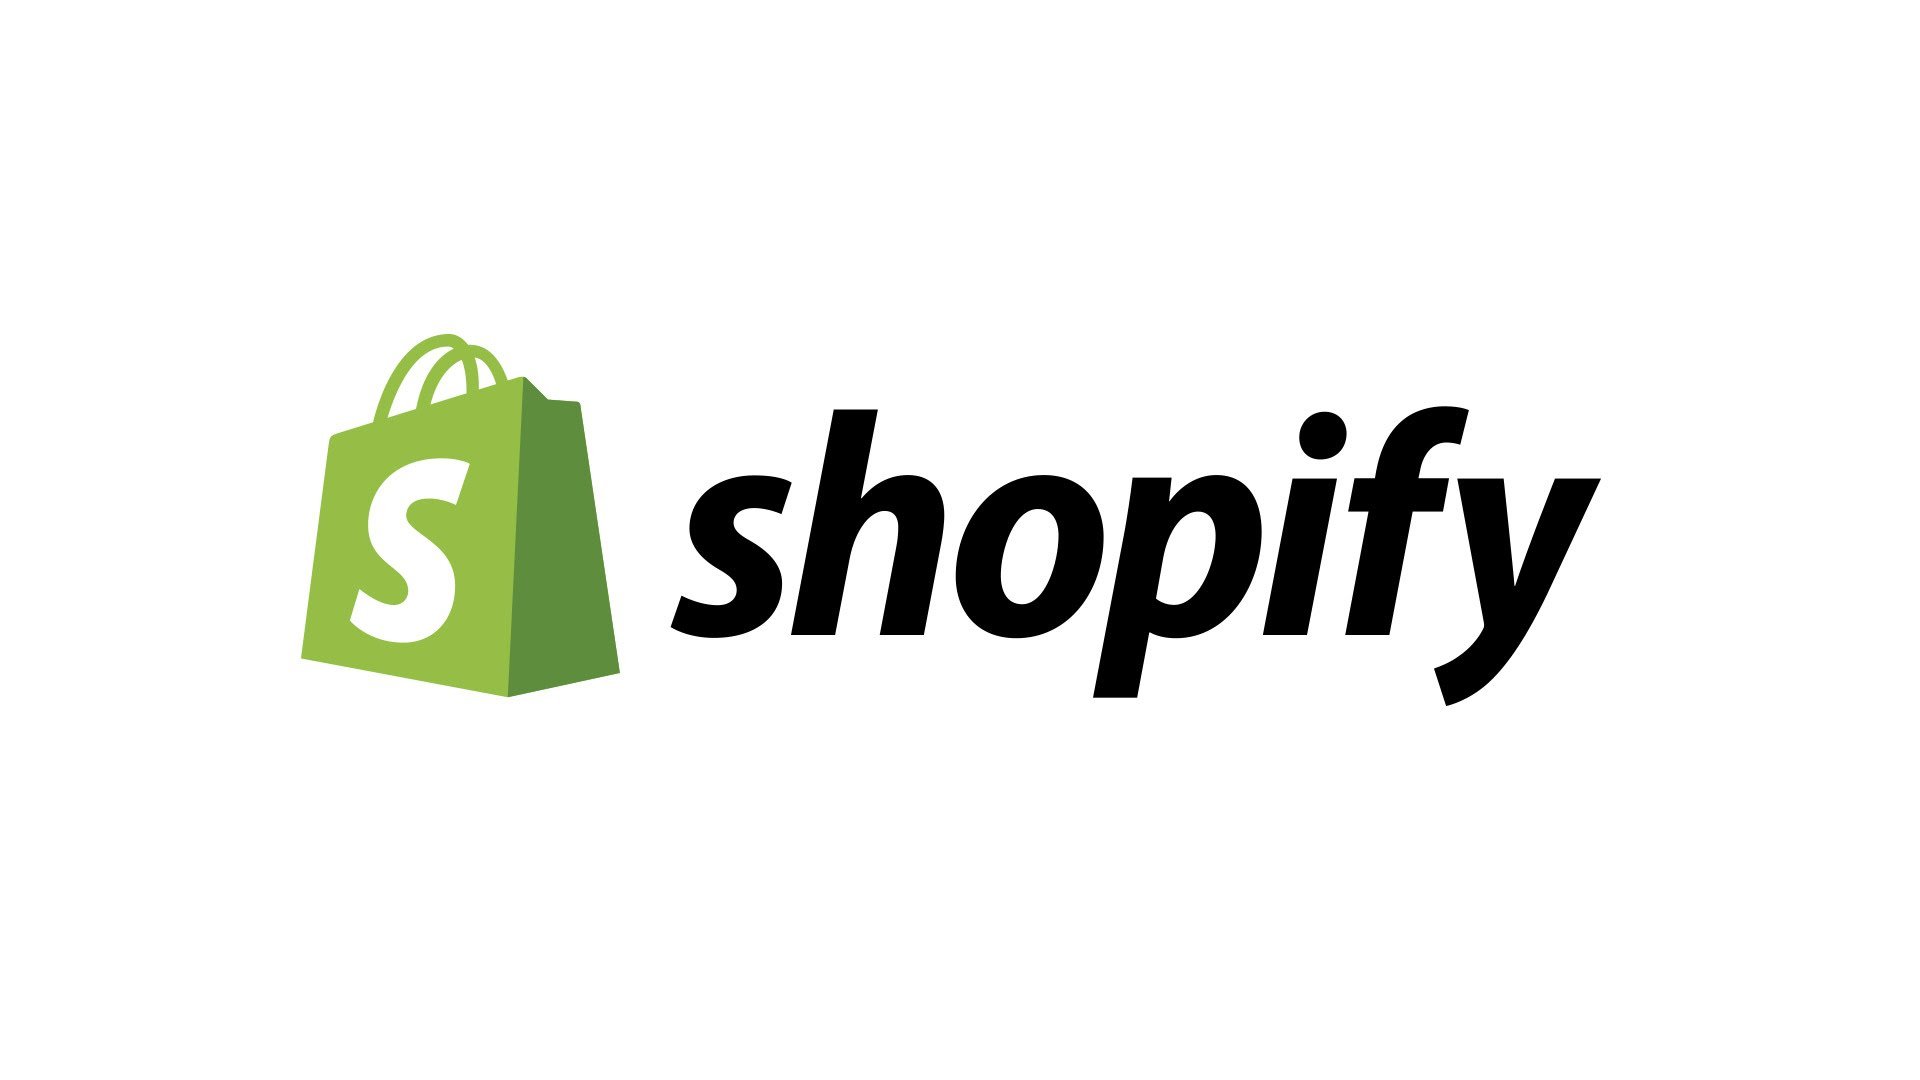 Shopify: An In-Depth Look